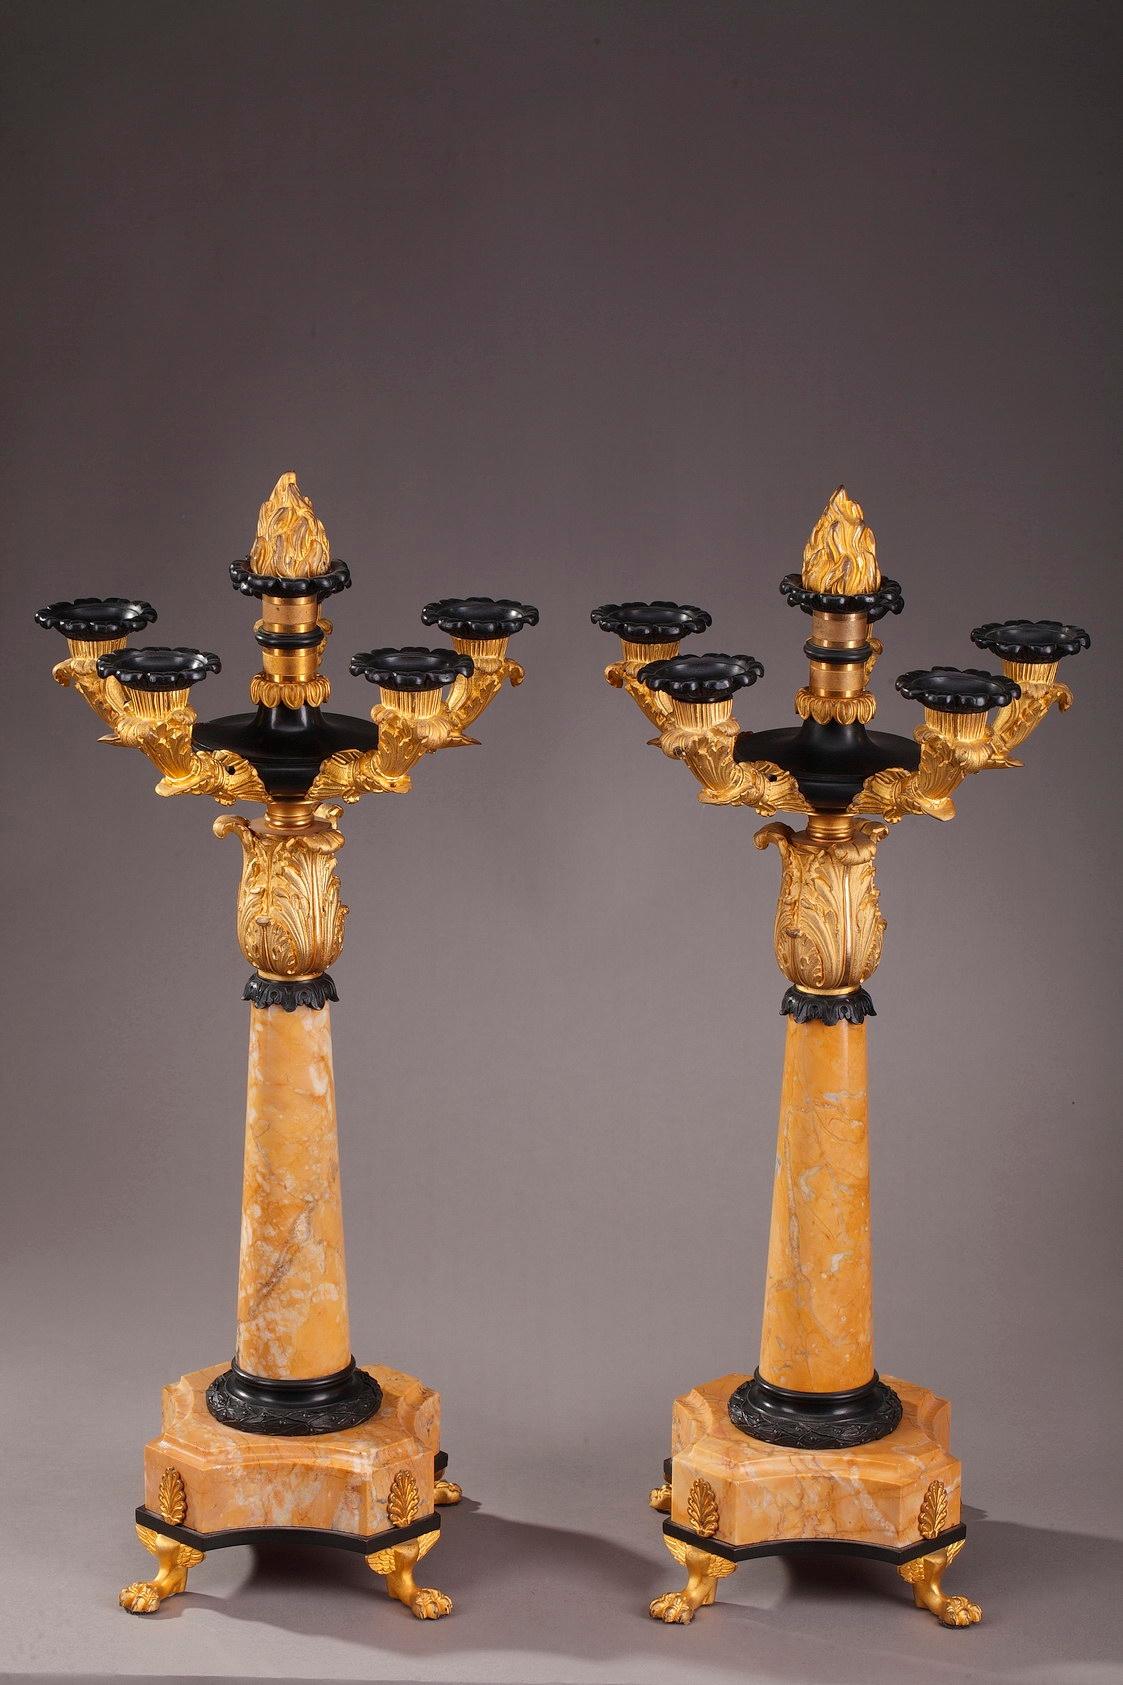 A set of table candelabras, each with five branches. The branches and feet of these large candelabra are in gilt and patinated bronze. They are richly decorated with acanthus leaves and foliage. The base and central shaft are in Sienna marble. Each